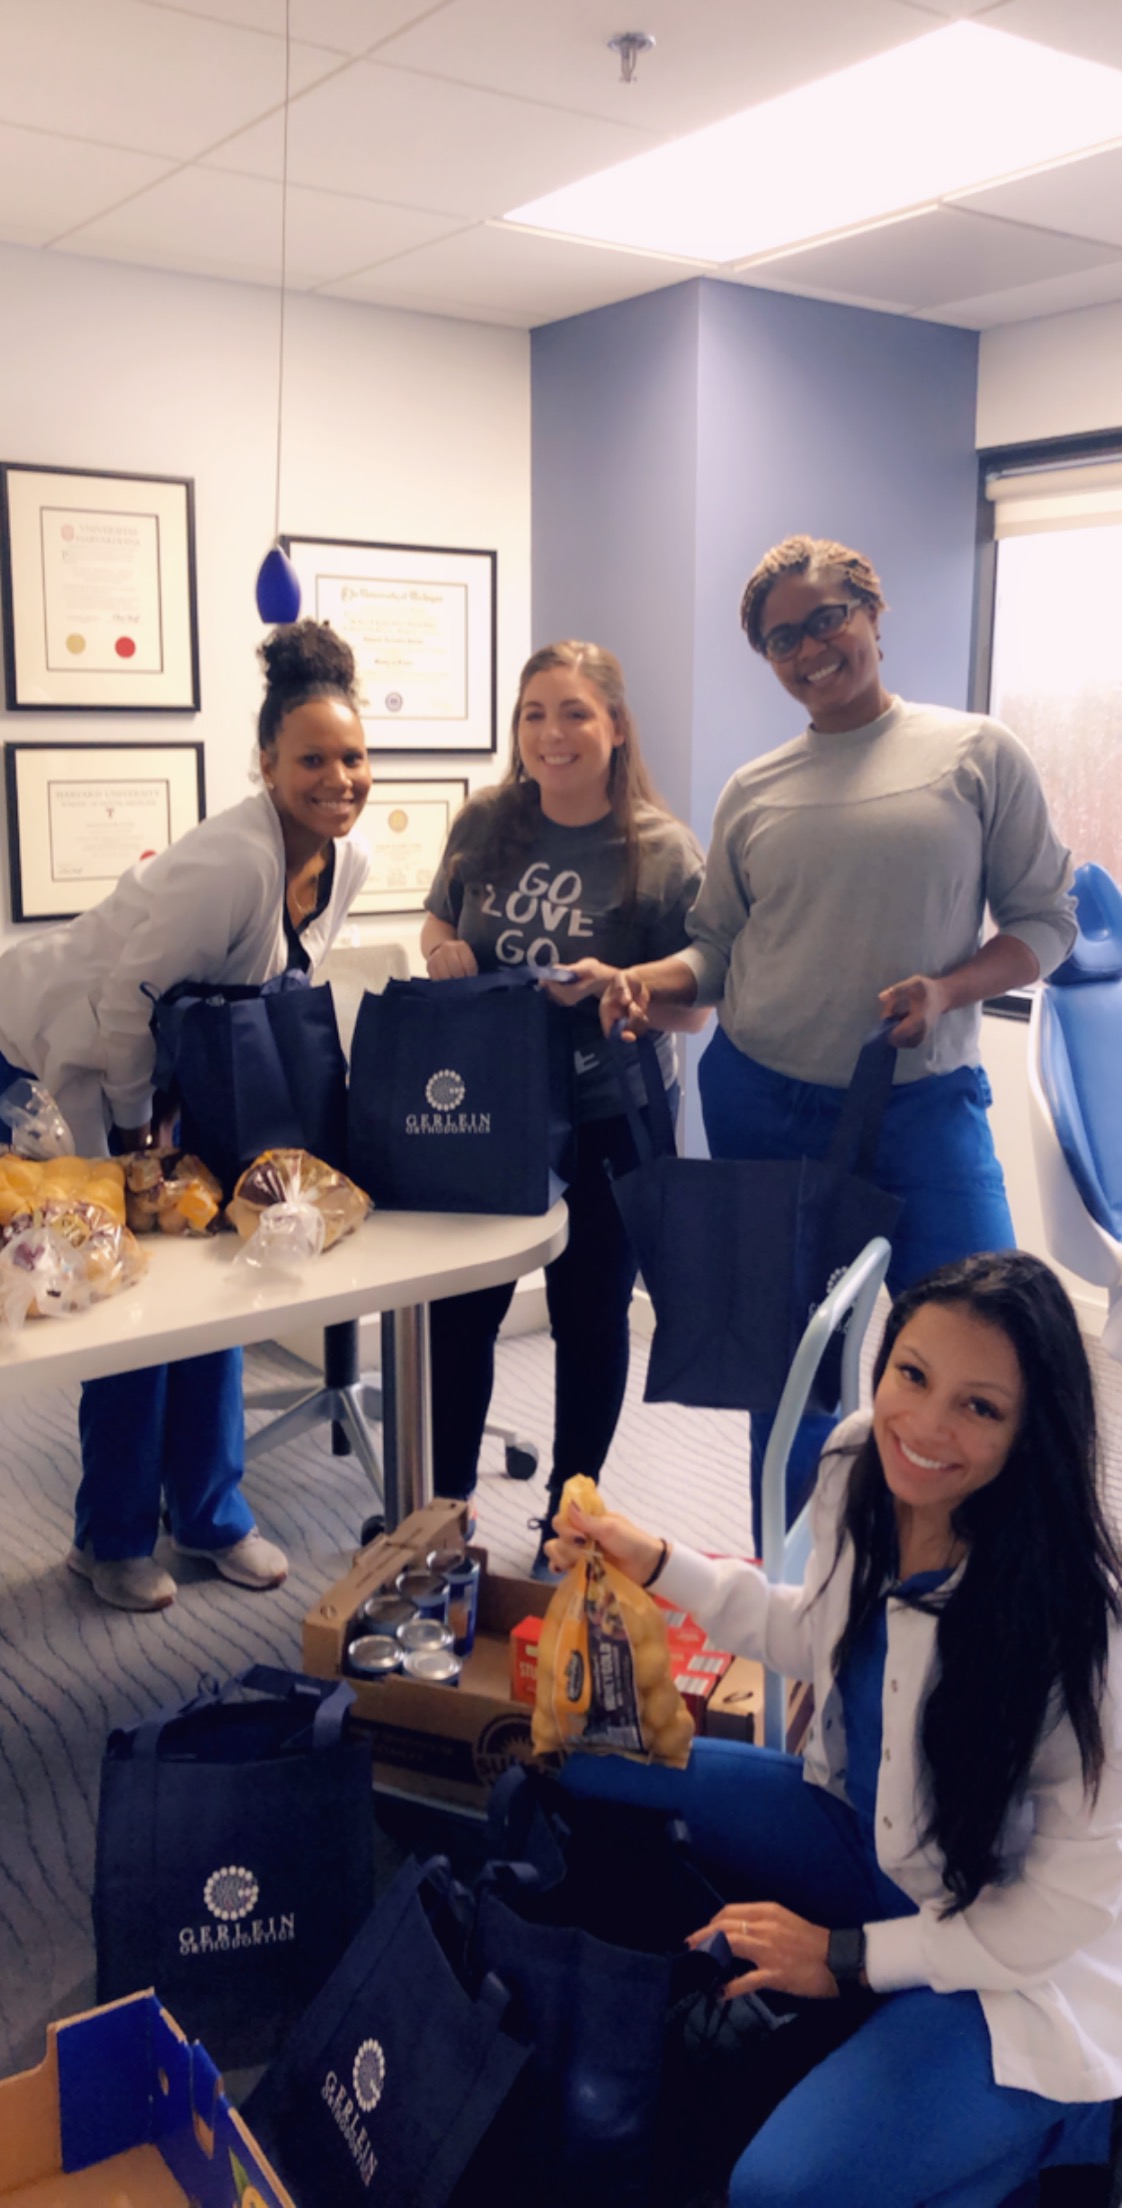 Gerlein team members standing in an office, smiling at the camera holding Gerlein Orthodontics bags. The bags are being filled with thanksgiving food to be dontated. More bags are on the floor